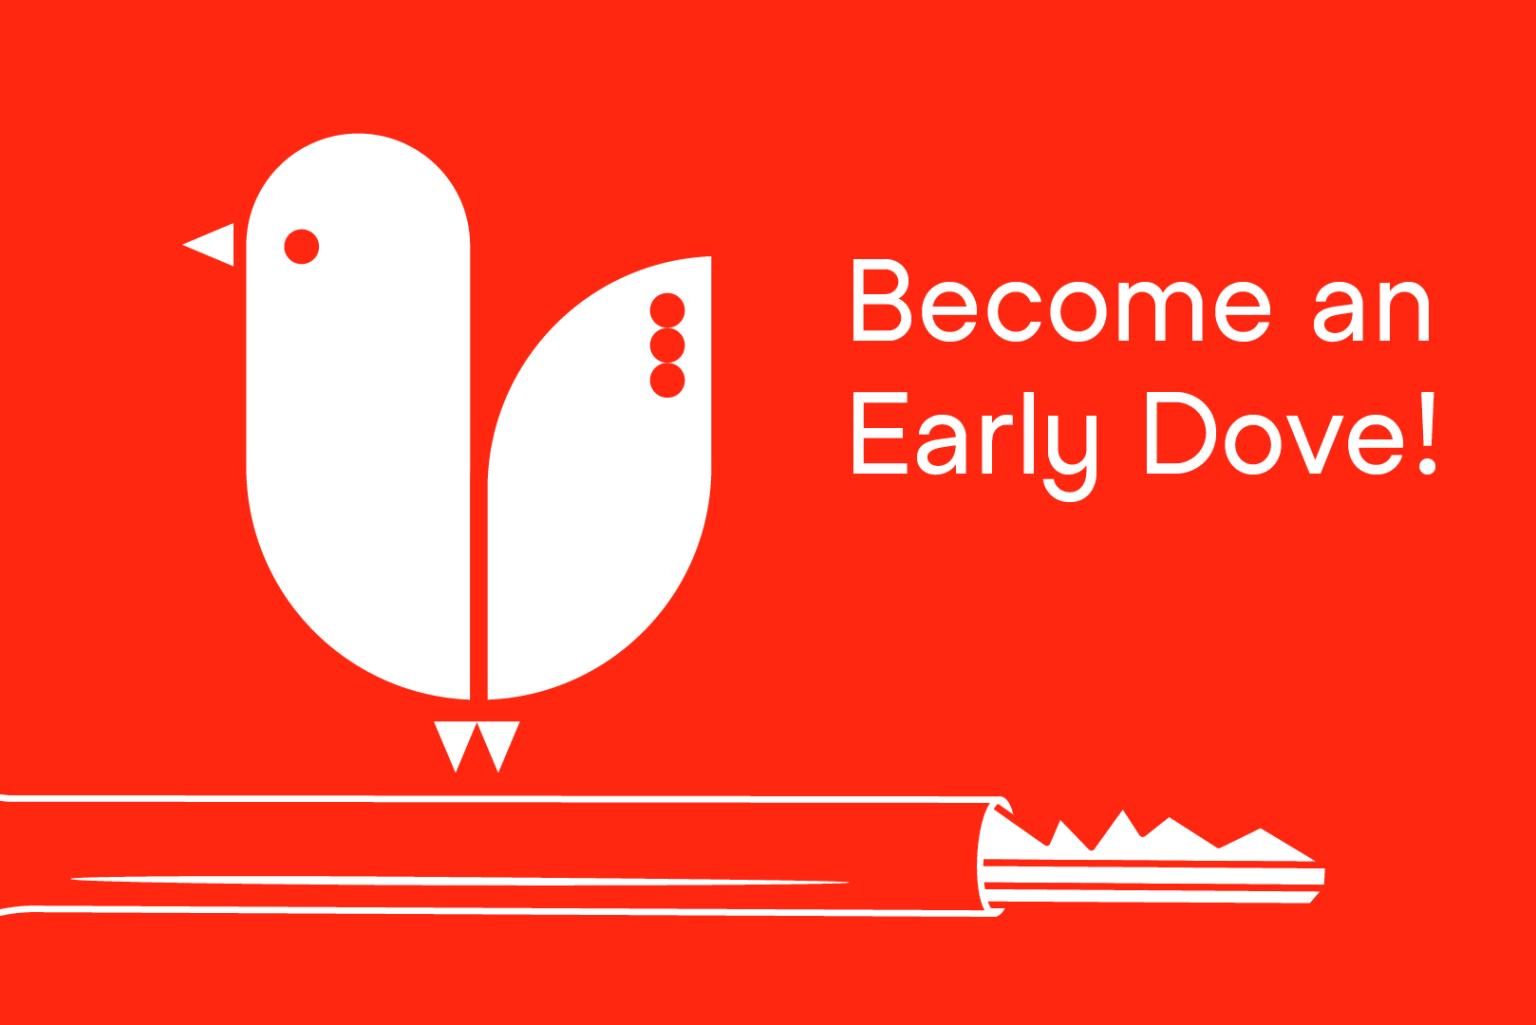 A text graphic on red background is showing a small white bird sitting on a key. Next to the bird the text: "Becomes an Early Dove". 